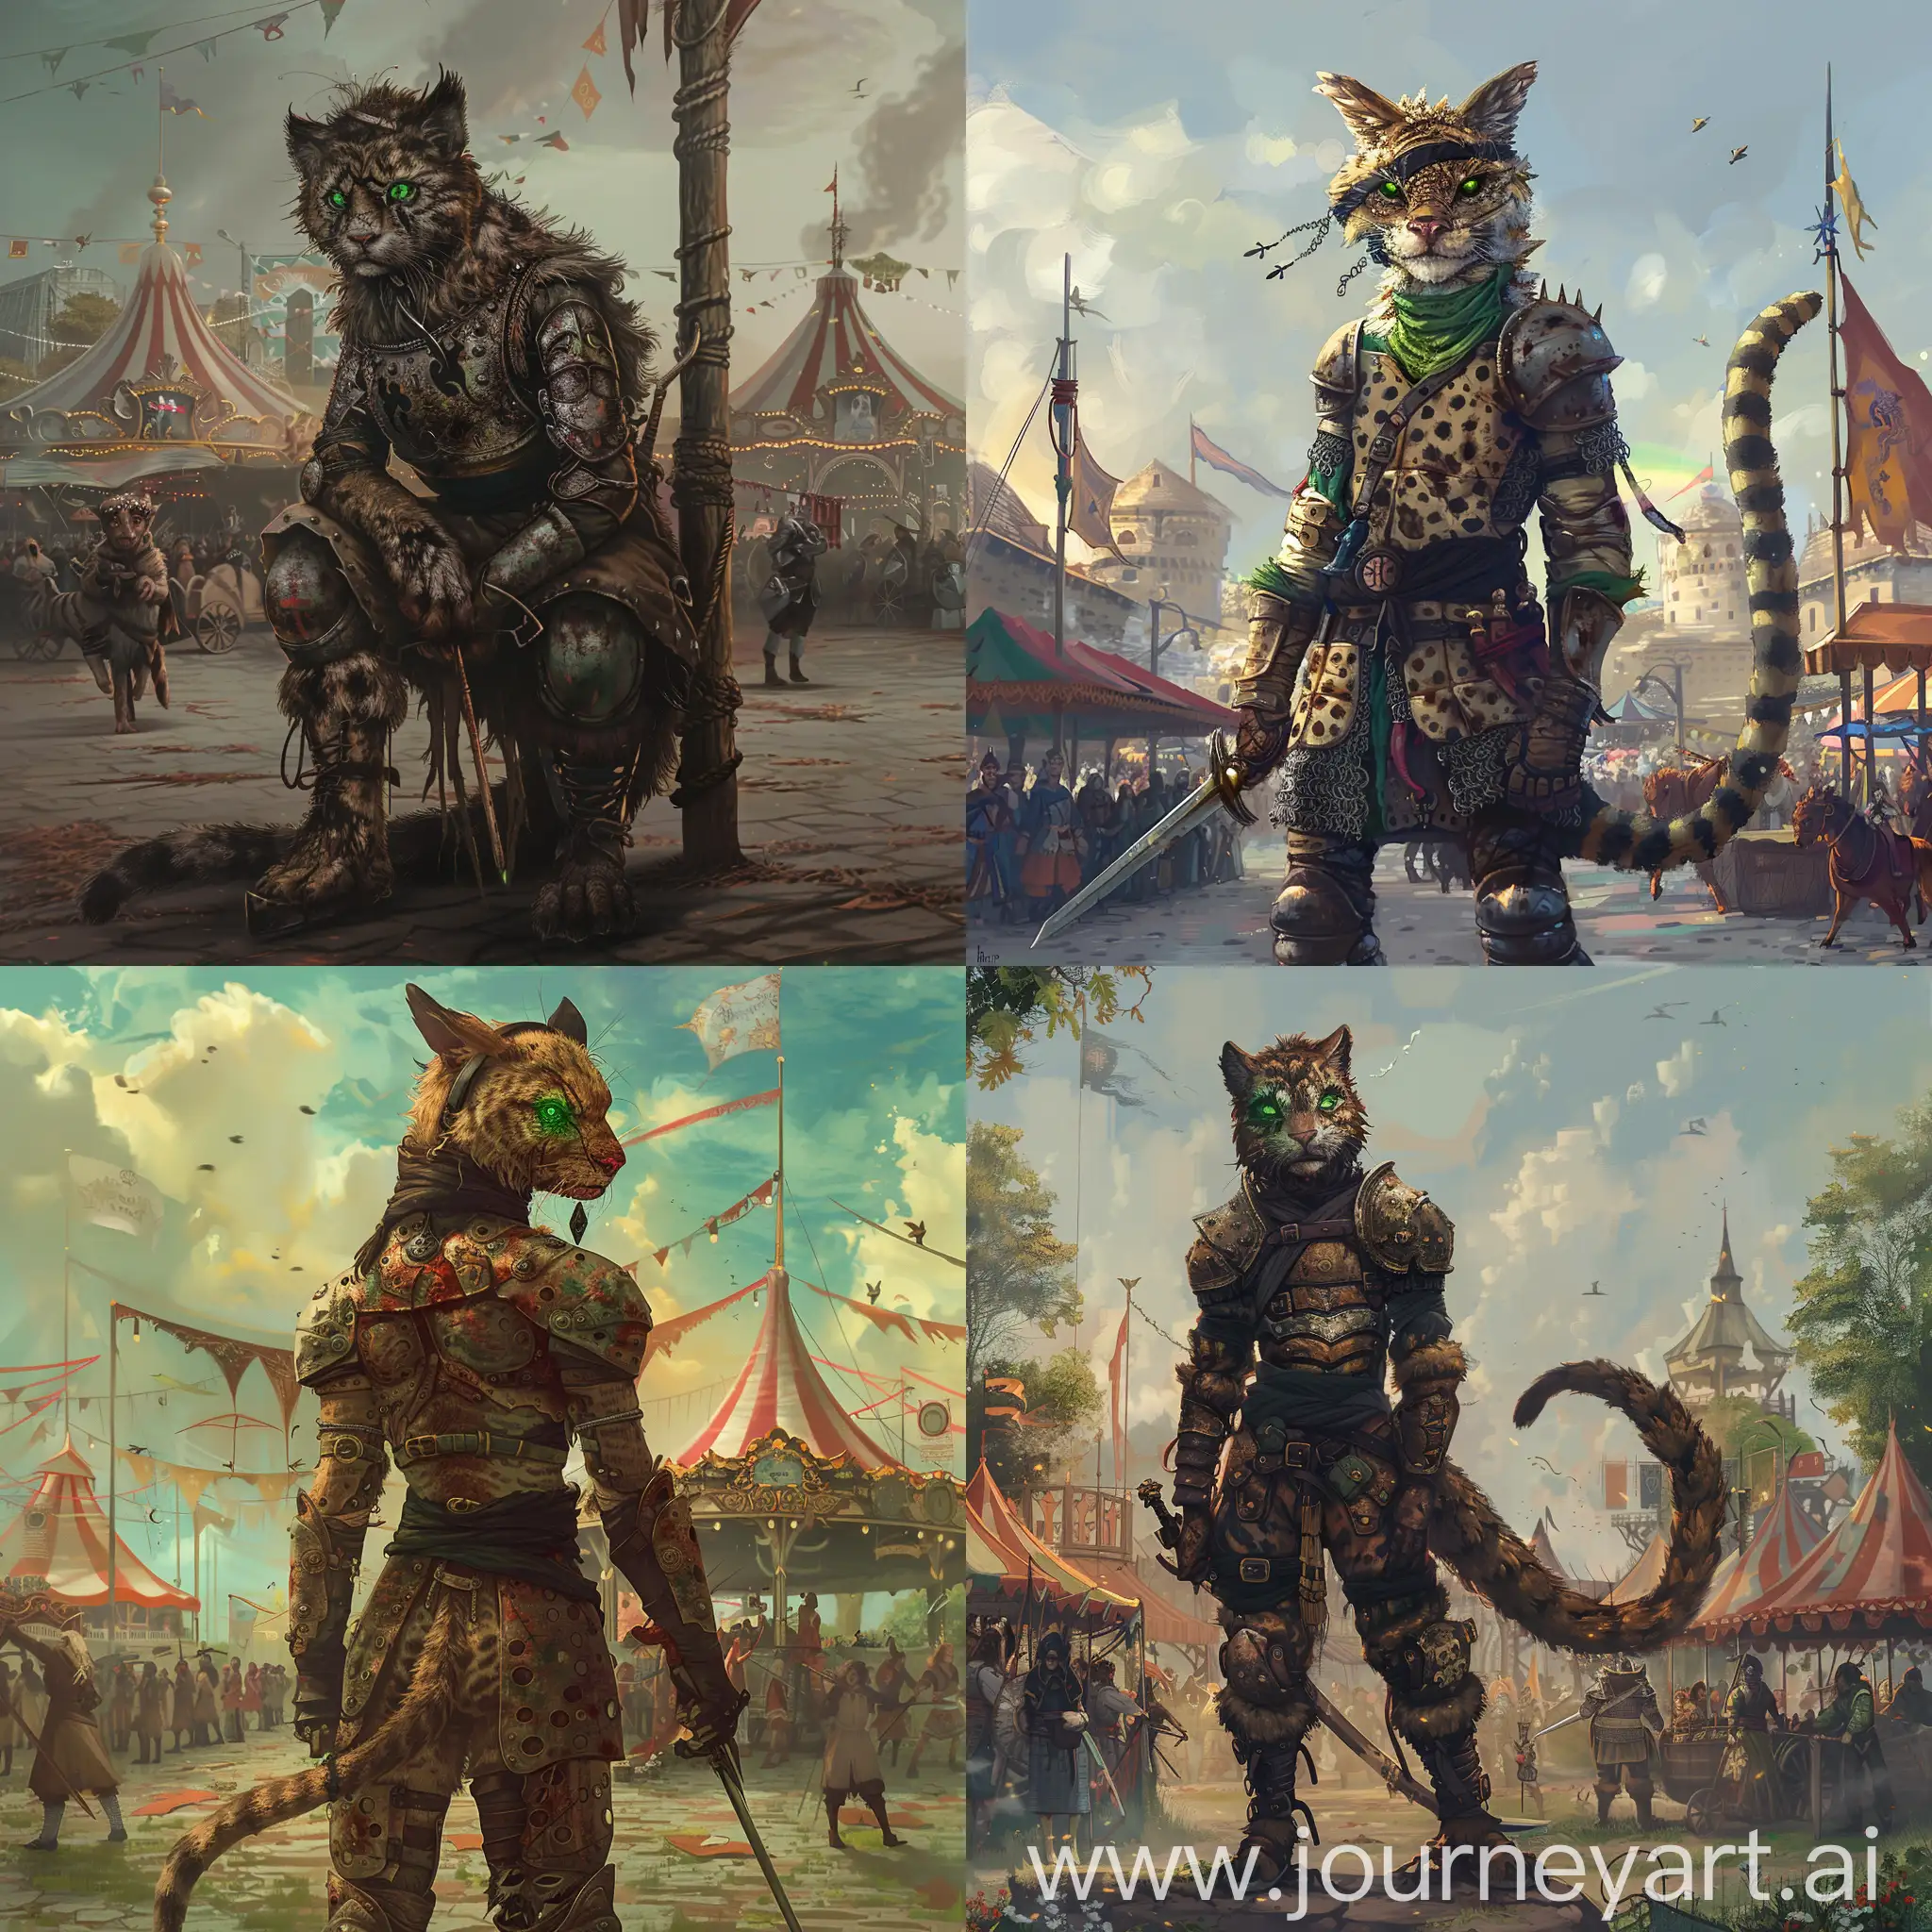 Medieval-Fantasy-Fair-Mysterious-Figure-with-Fur-Tail-and-Rapier